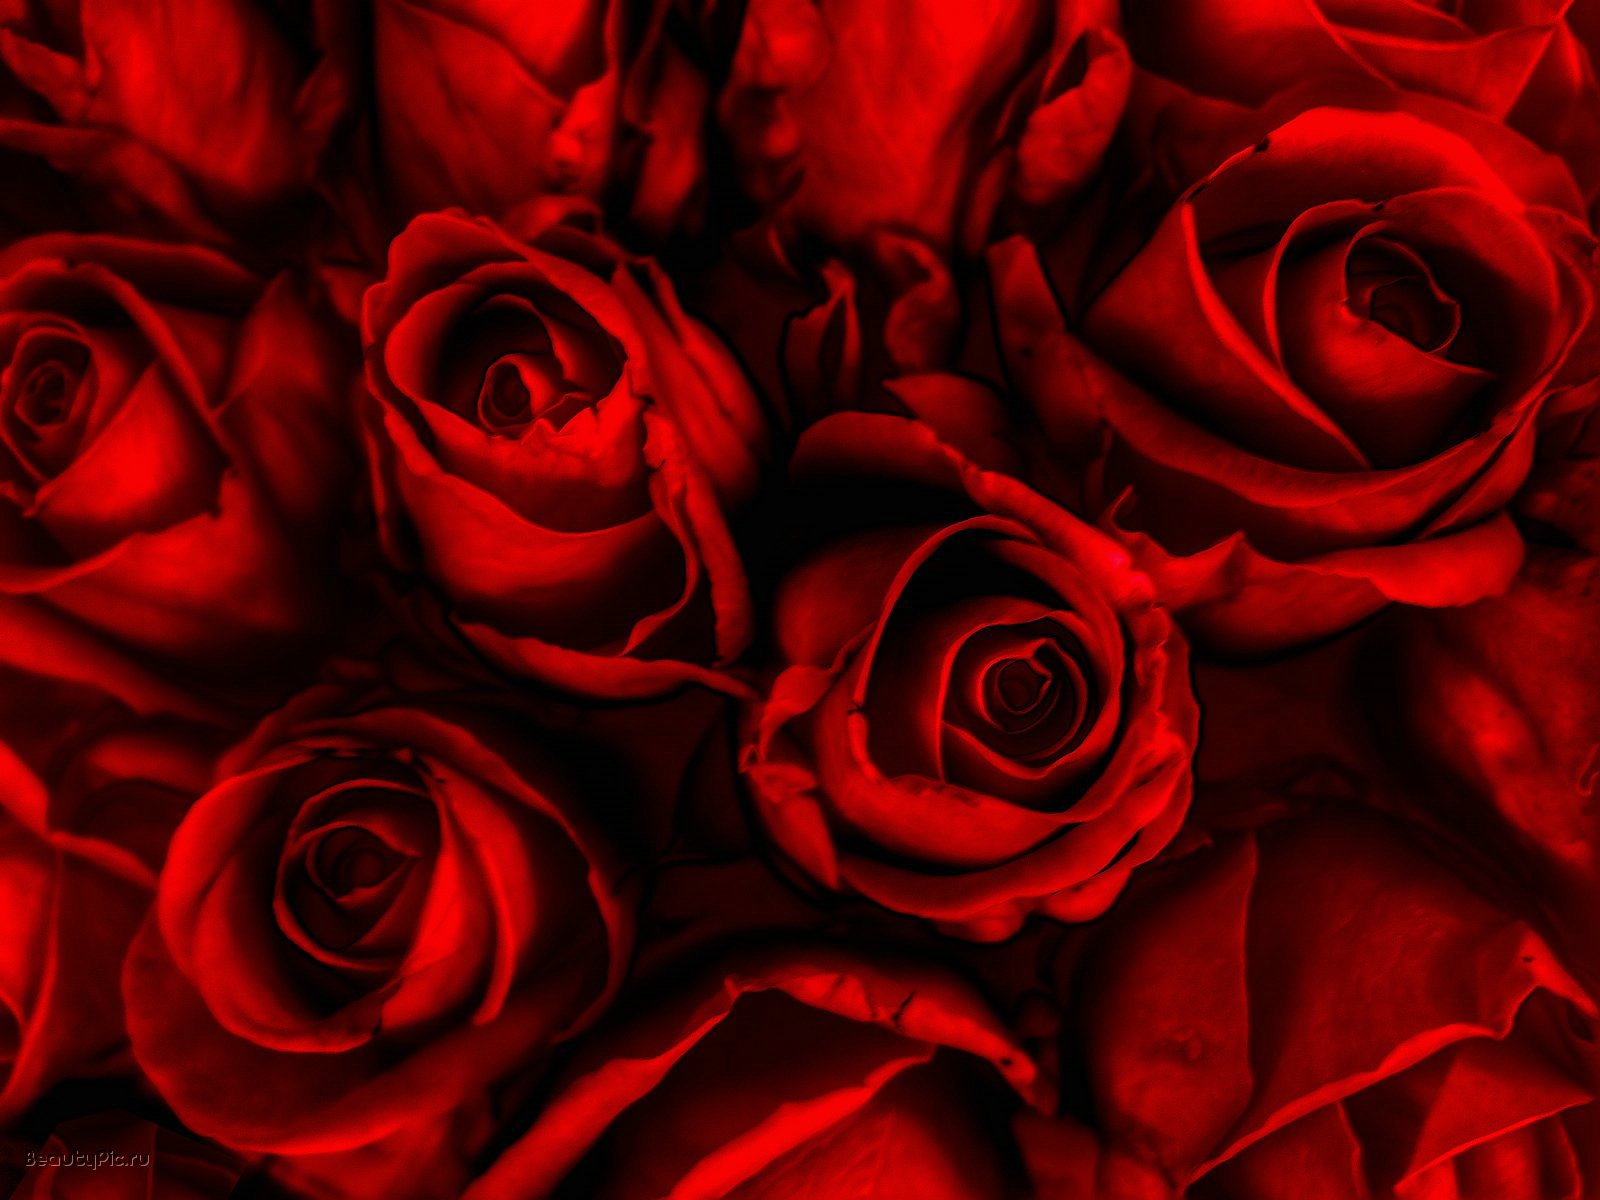 rose red roses hd 1280x960px download high resolution hd rose red